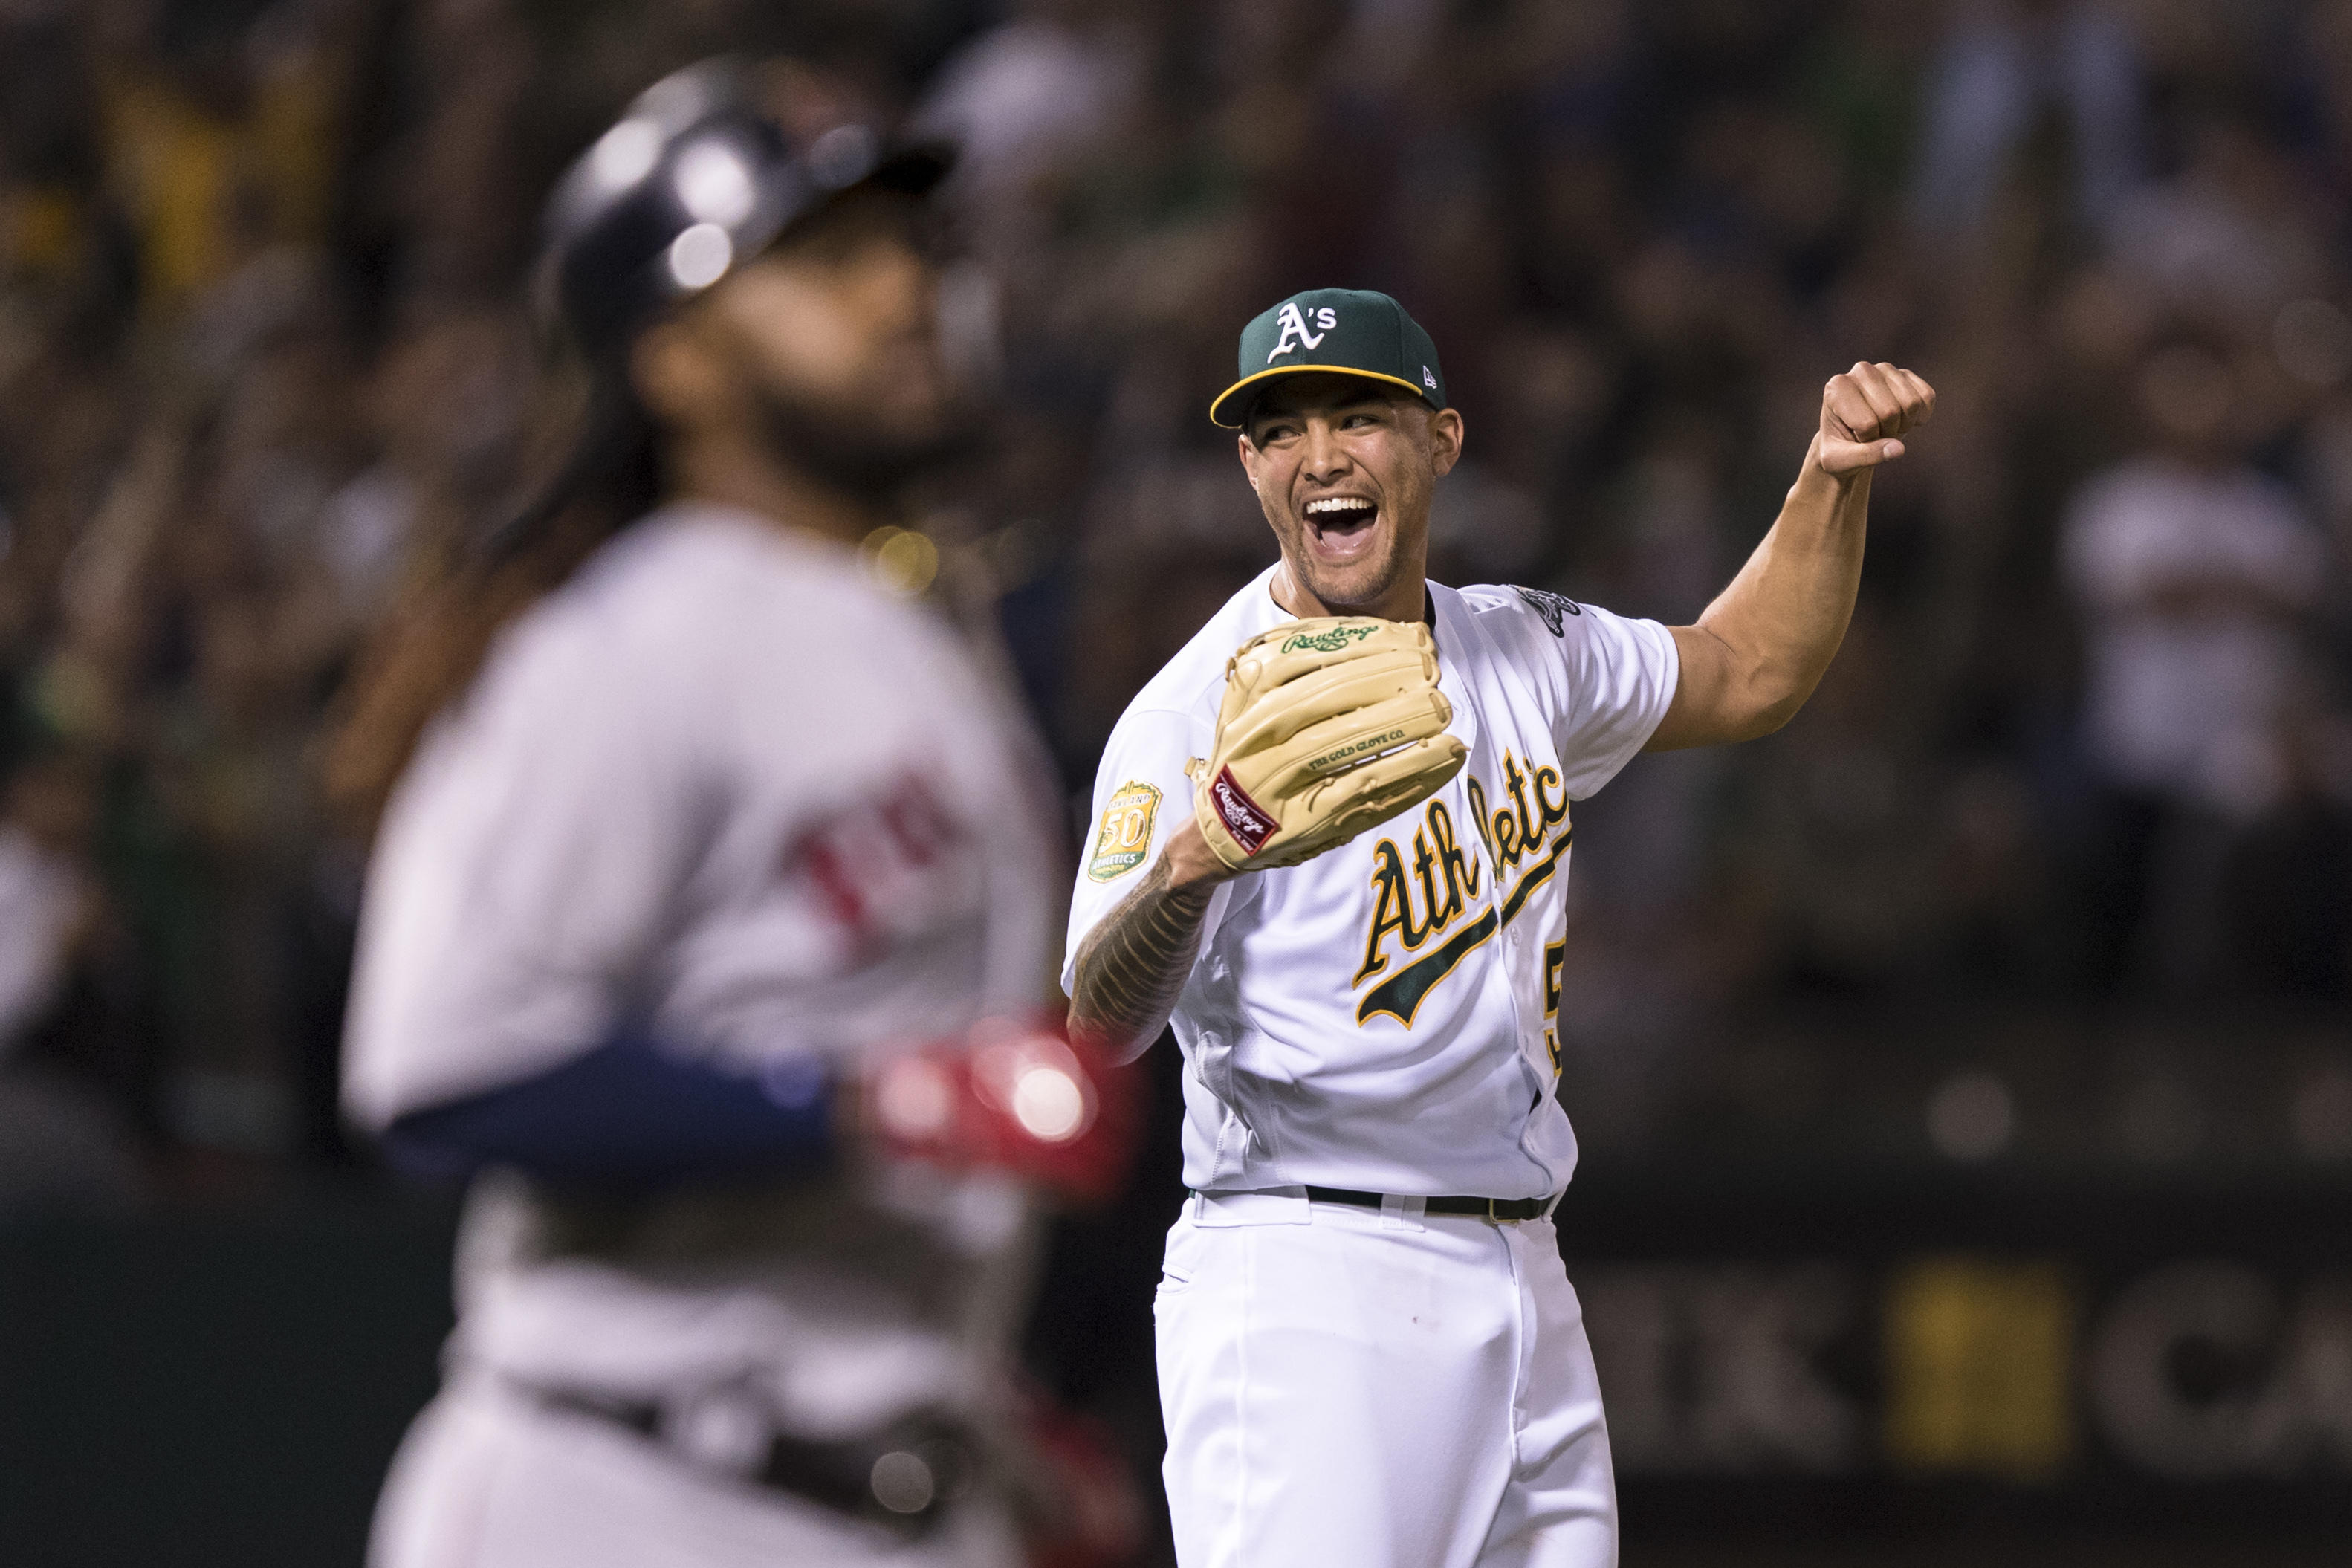 Oakland A's Sean Manaea pitches no-hitter against Red Sox - CBS News